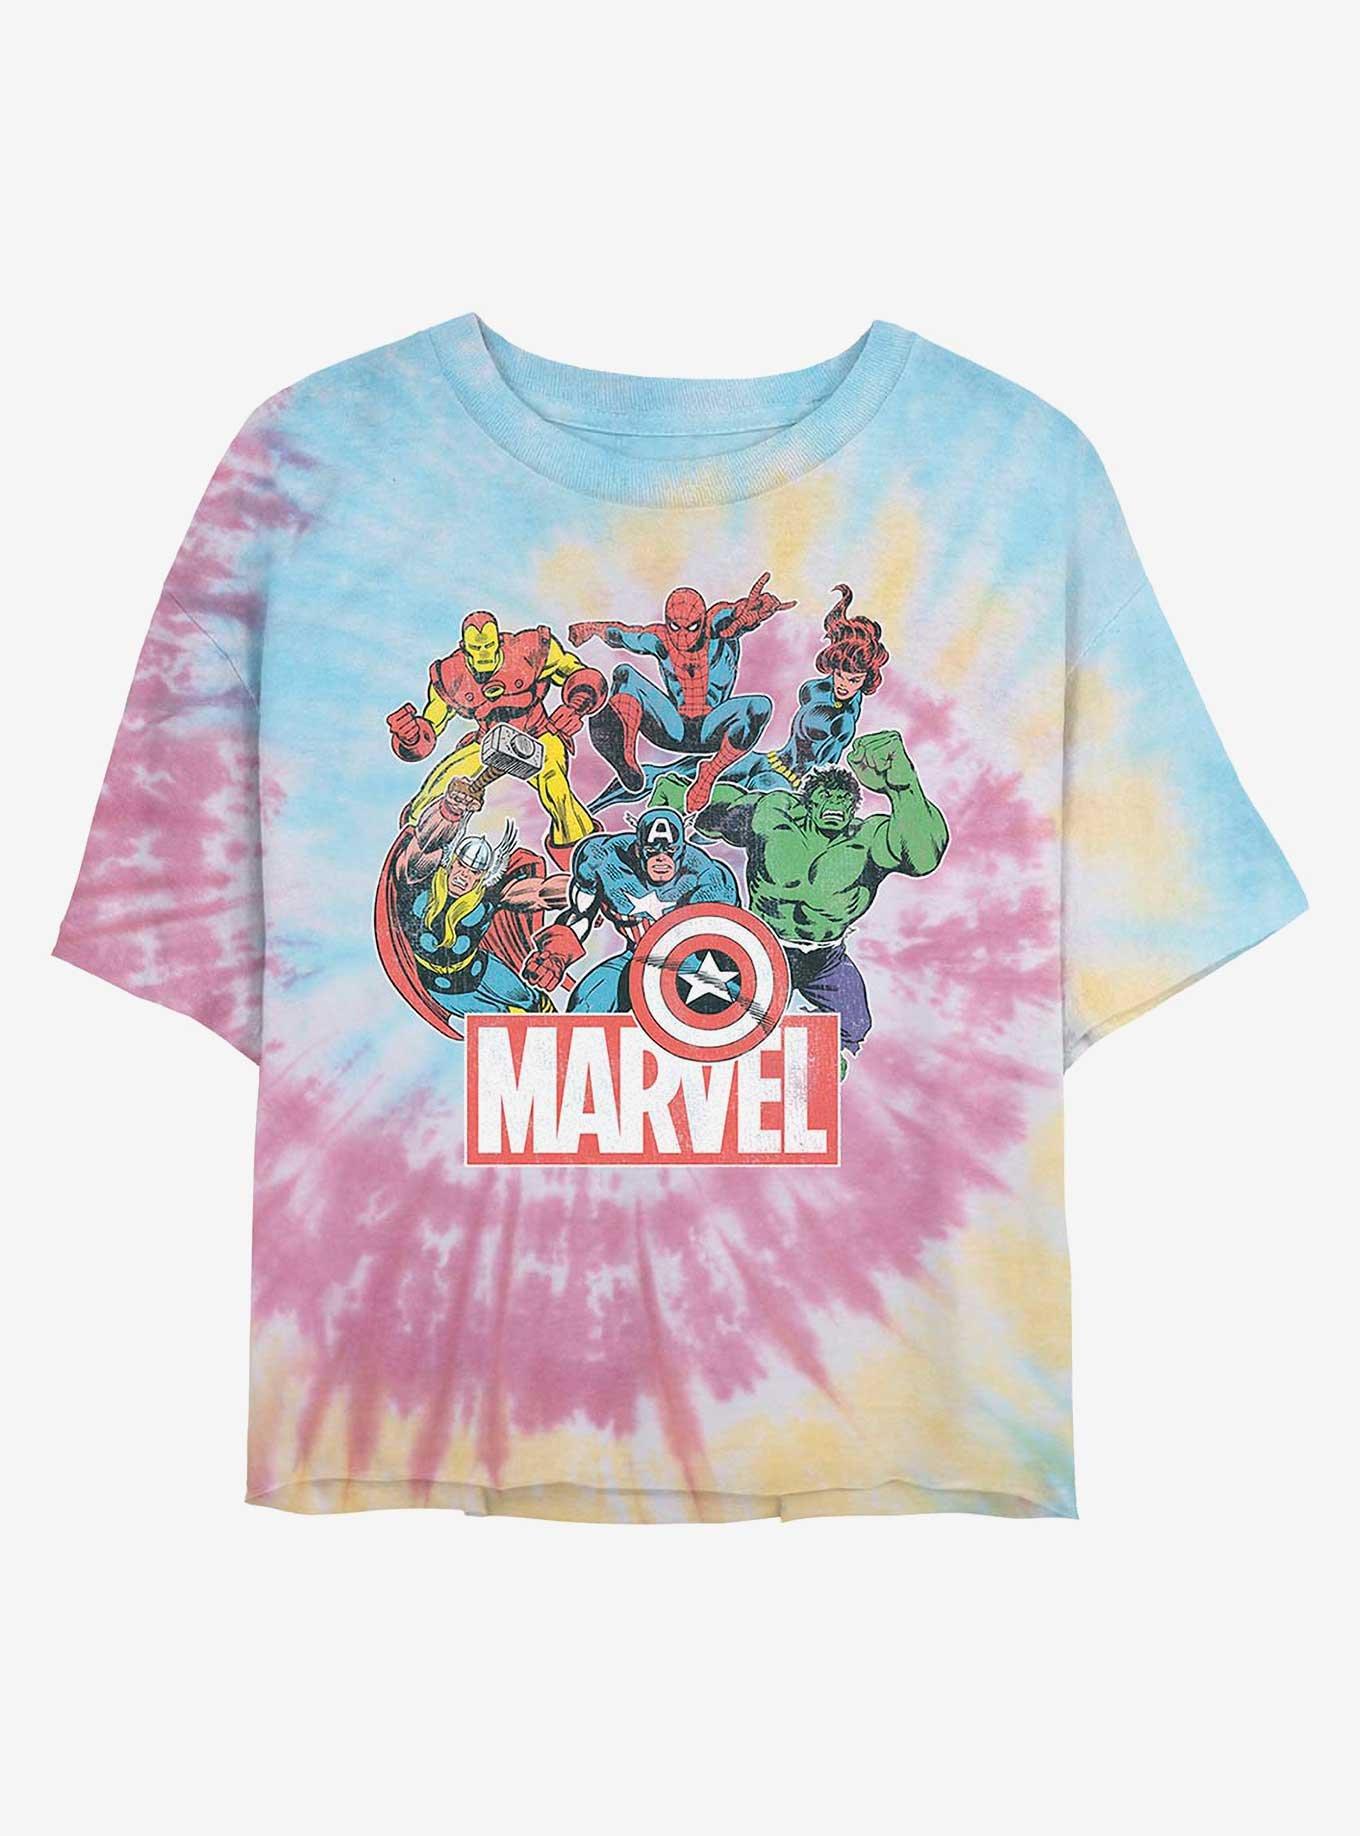 Marvel Avengers Heroes of Today Tie Dye Crop Girls T-Shirt, BLUPNKLY, hi-res